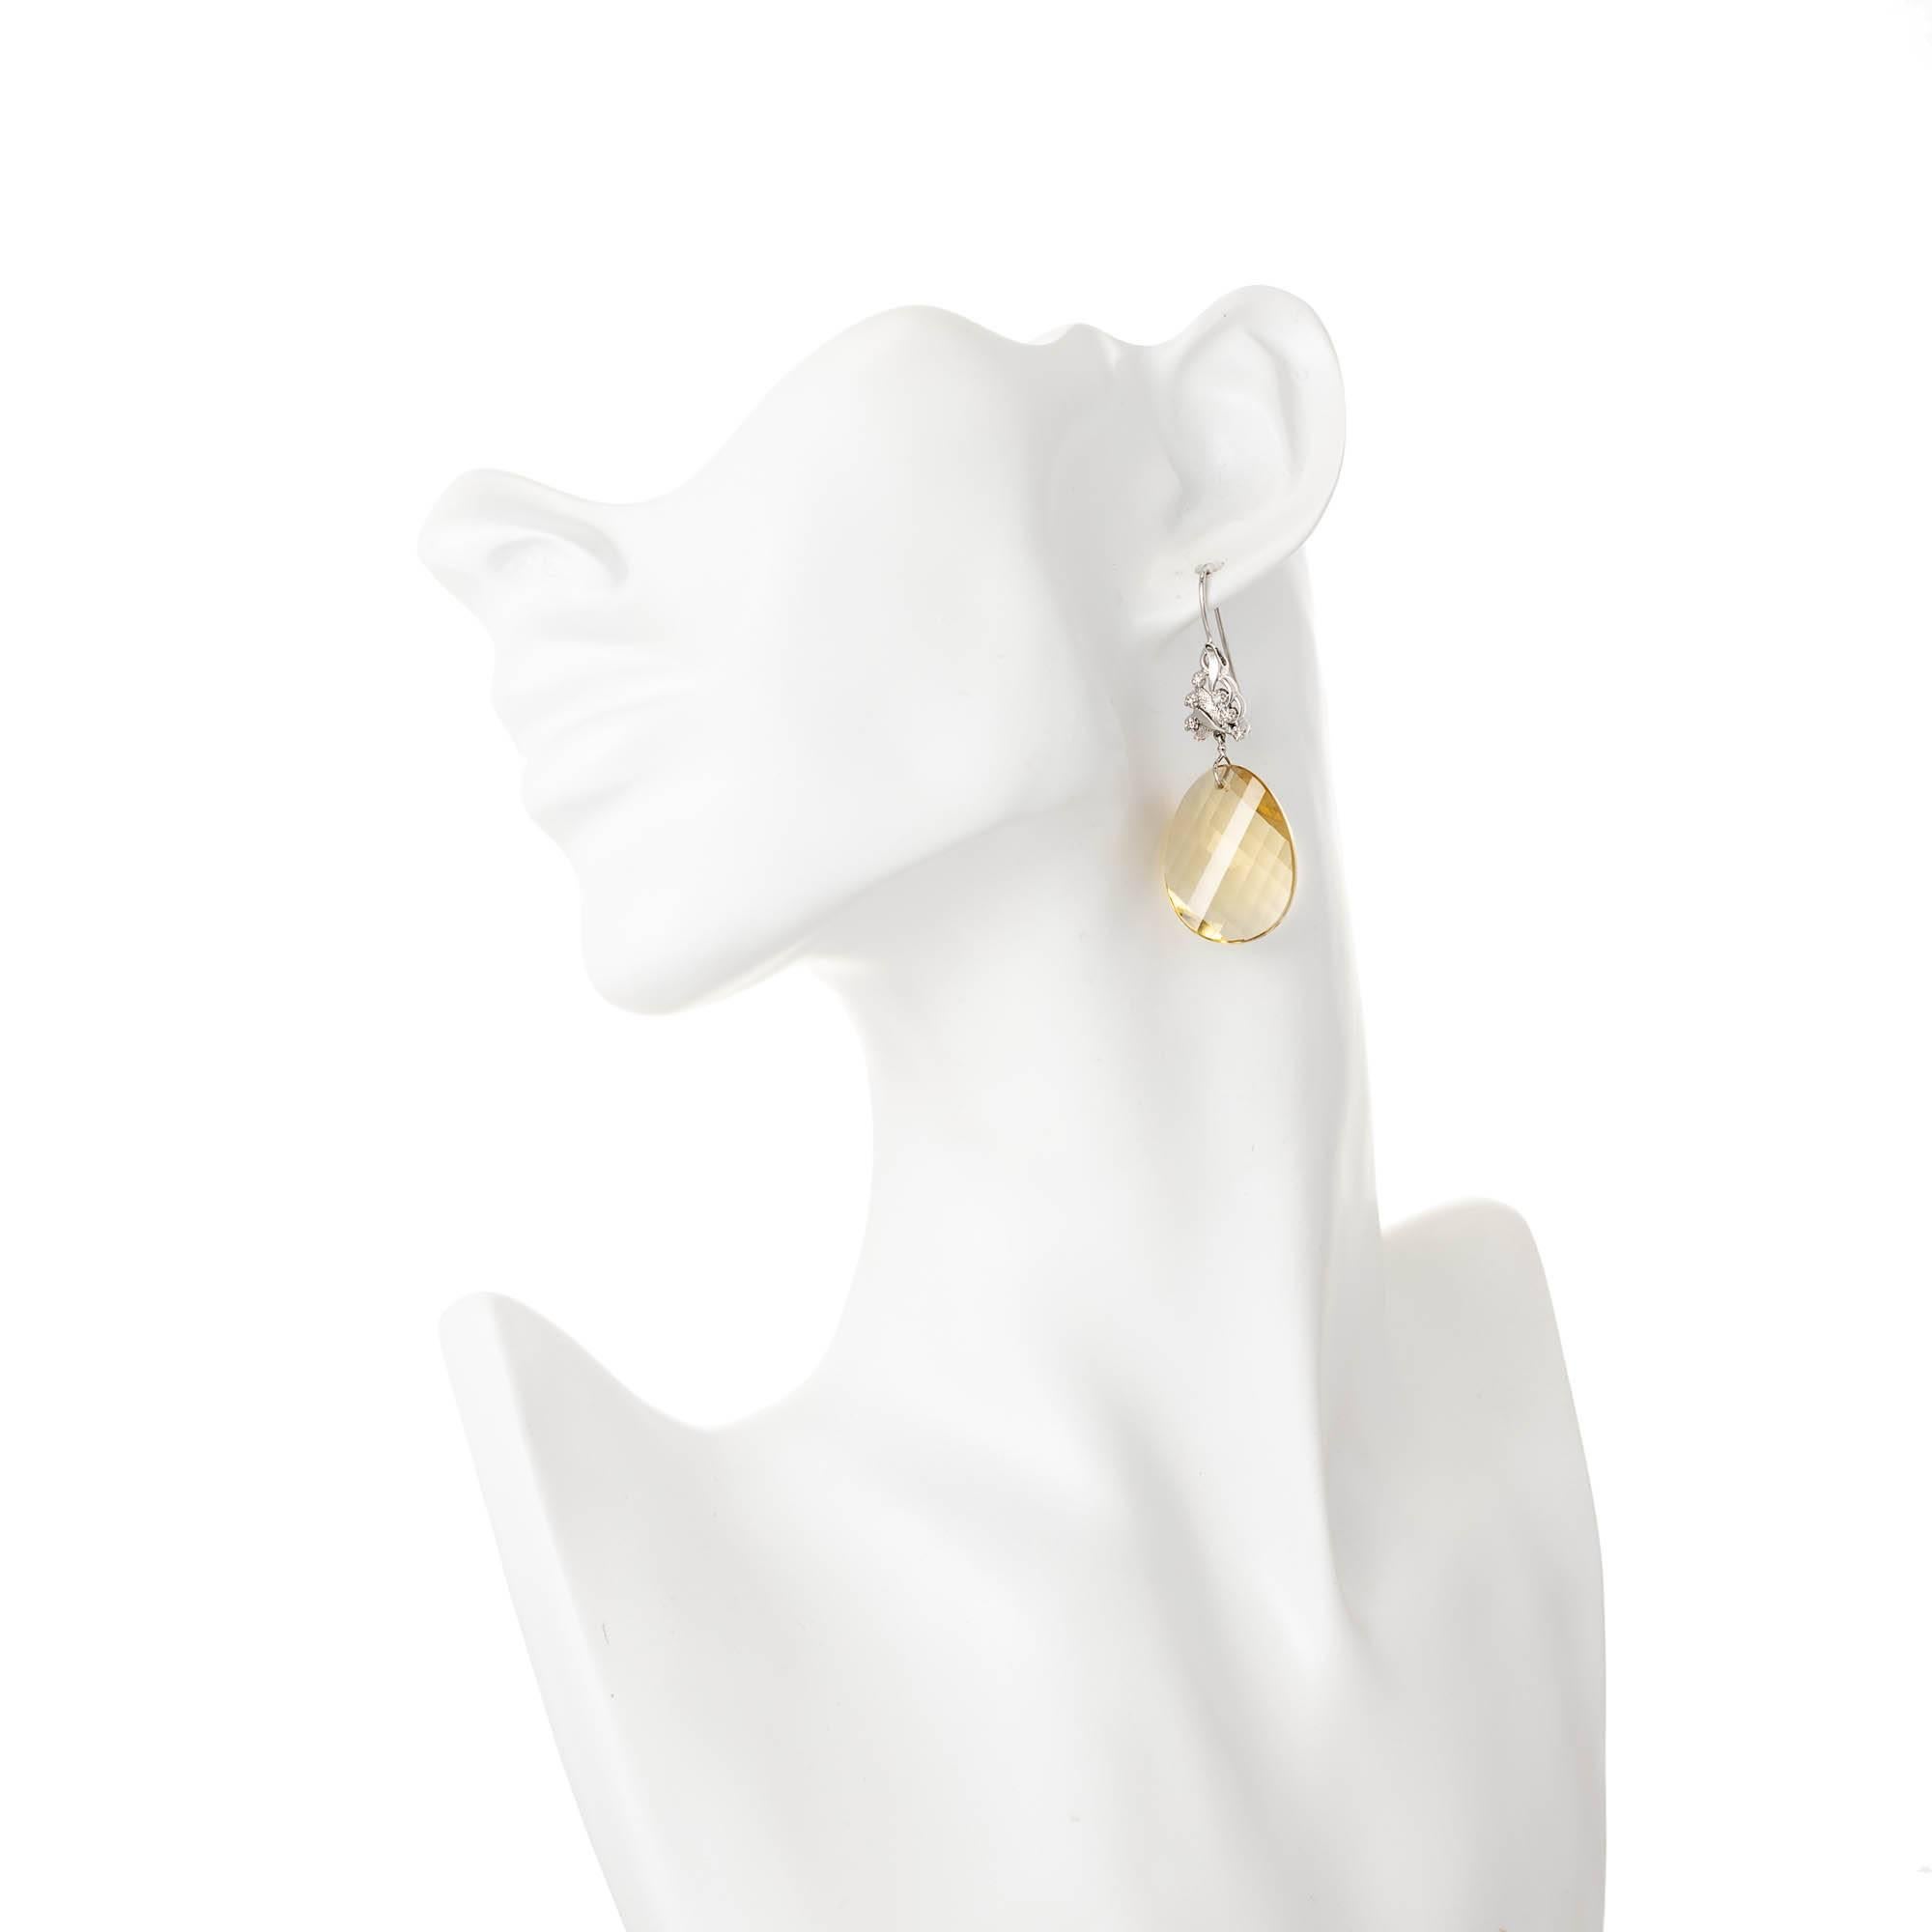 43.00 Carat Swirl Faceted Natural Lemon Quartz Diamond Gold Dangle Earrings In Good Condition For Sale In Stamford, CT